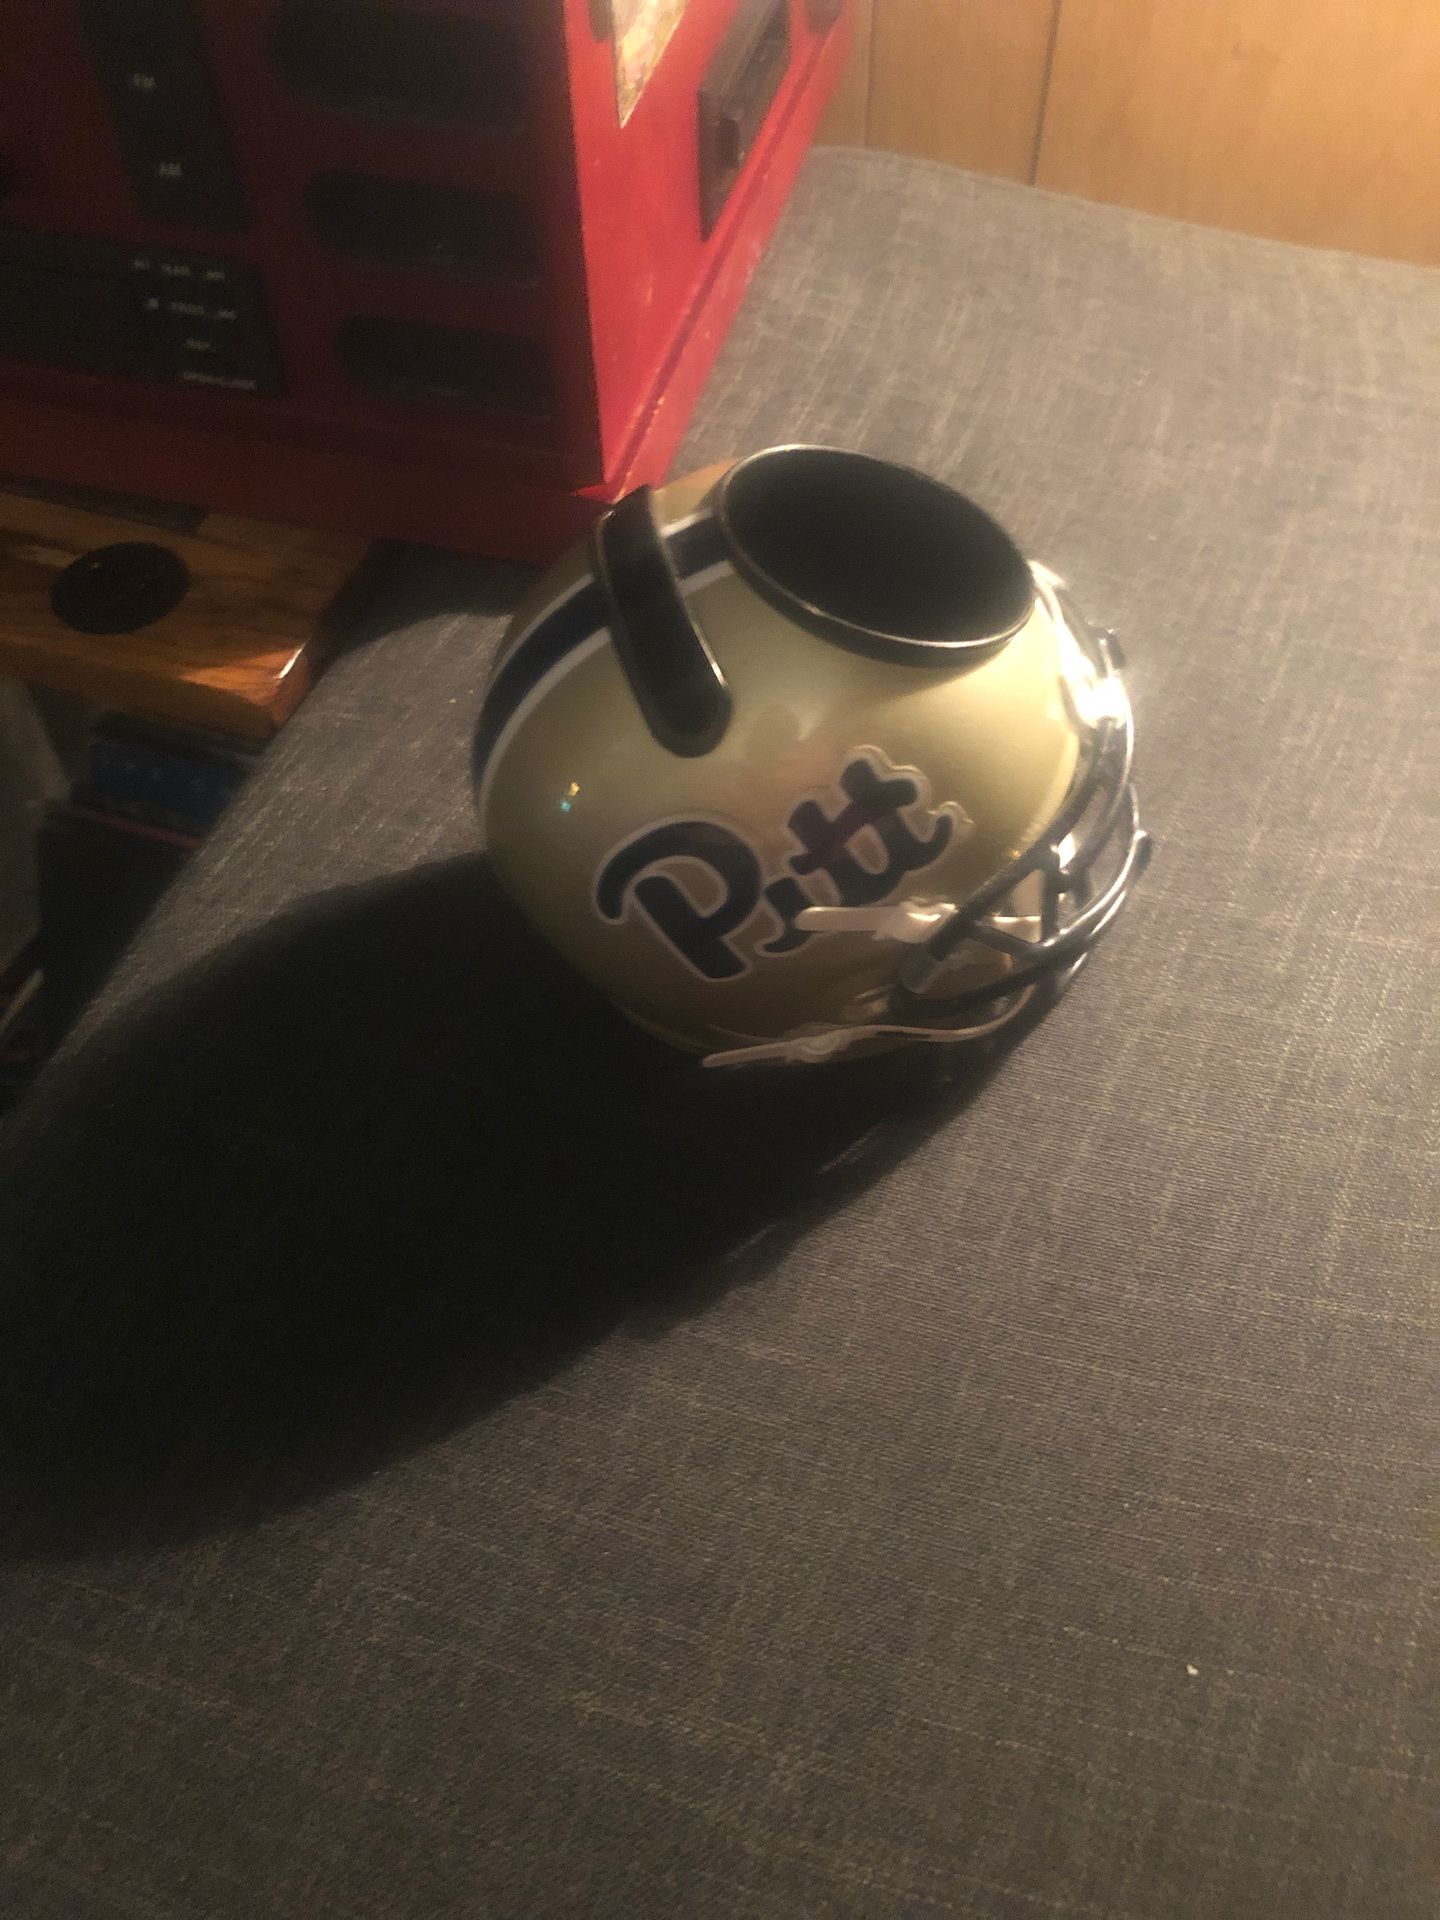 Pittsburgh Panthers desk caddy